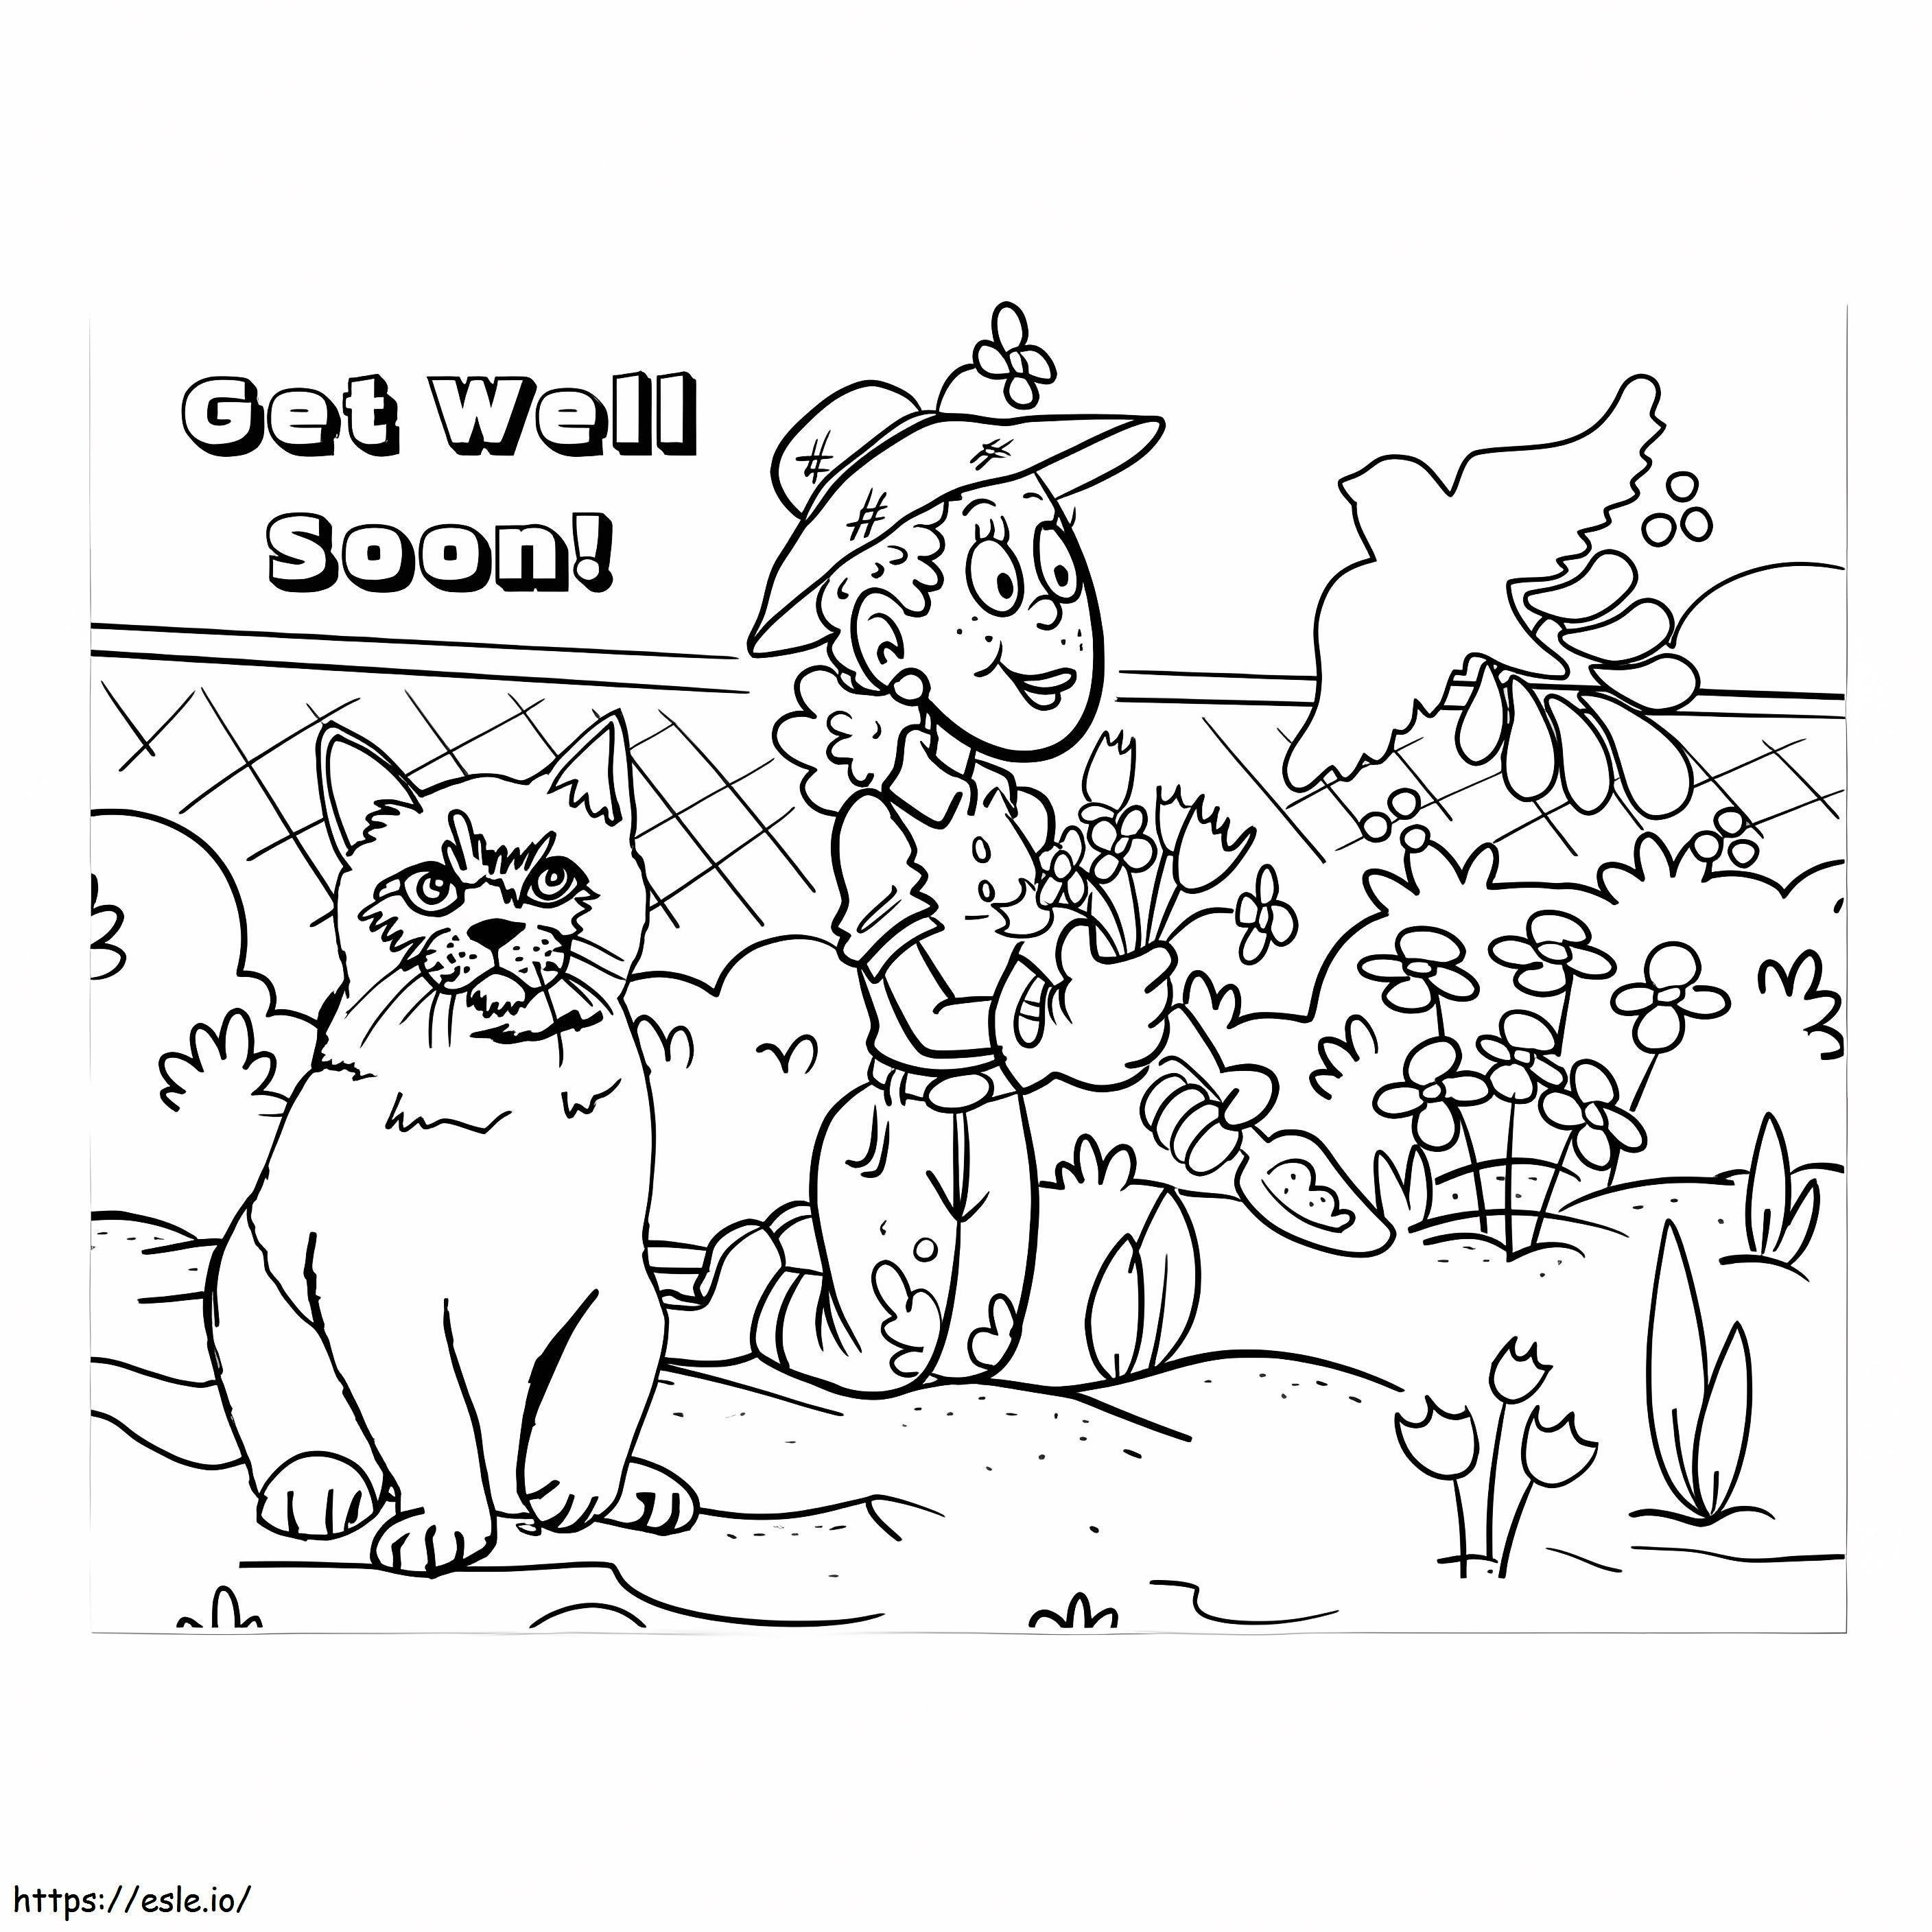 Get Well Soon Coloring Page 9 coloring page